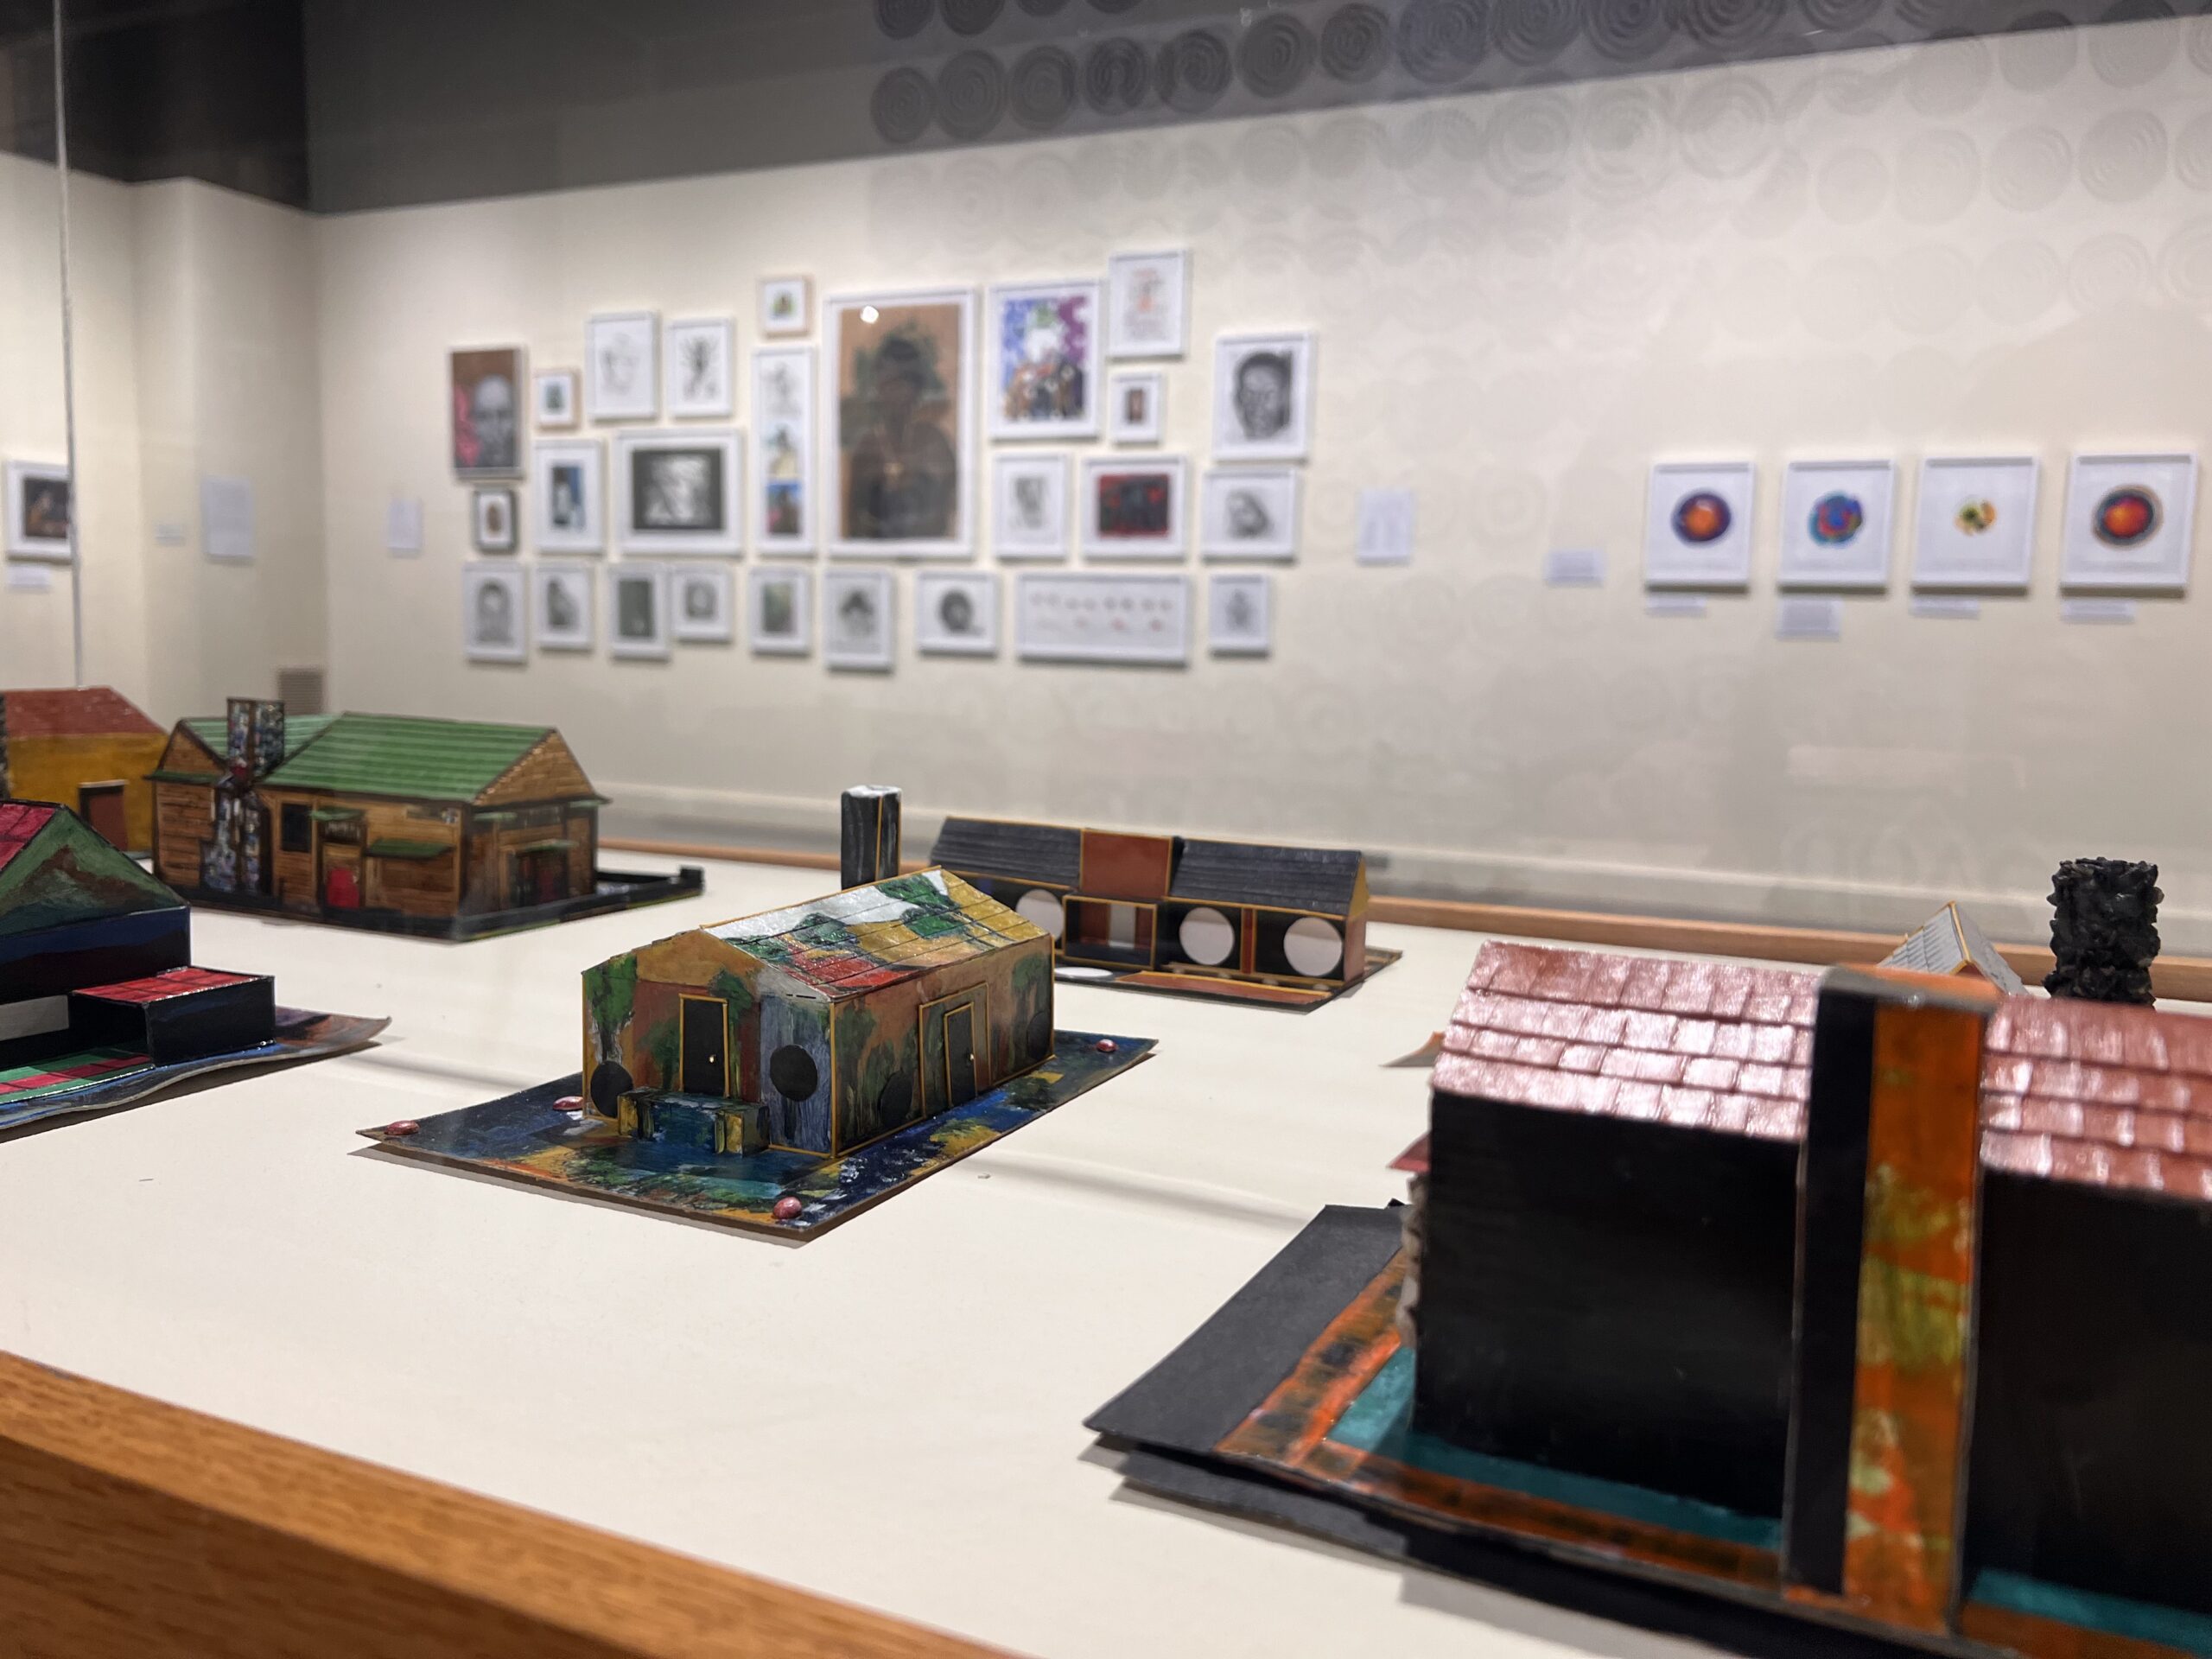 An art exhibition with a display of miniature house sculptures. The wall in the background has varying sizes of framed drawings and paintings hung on it.